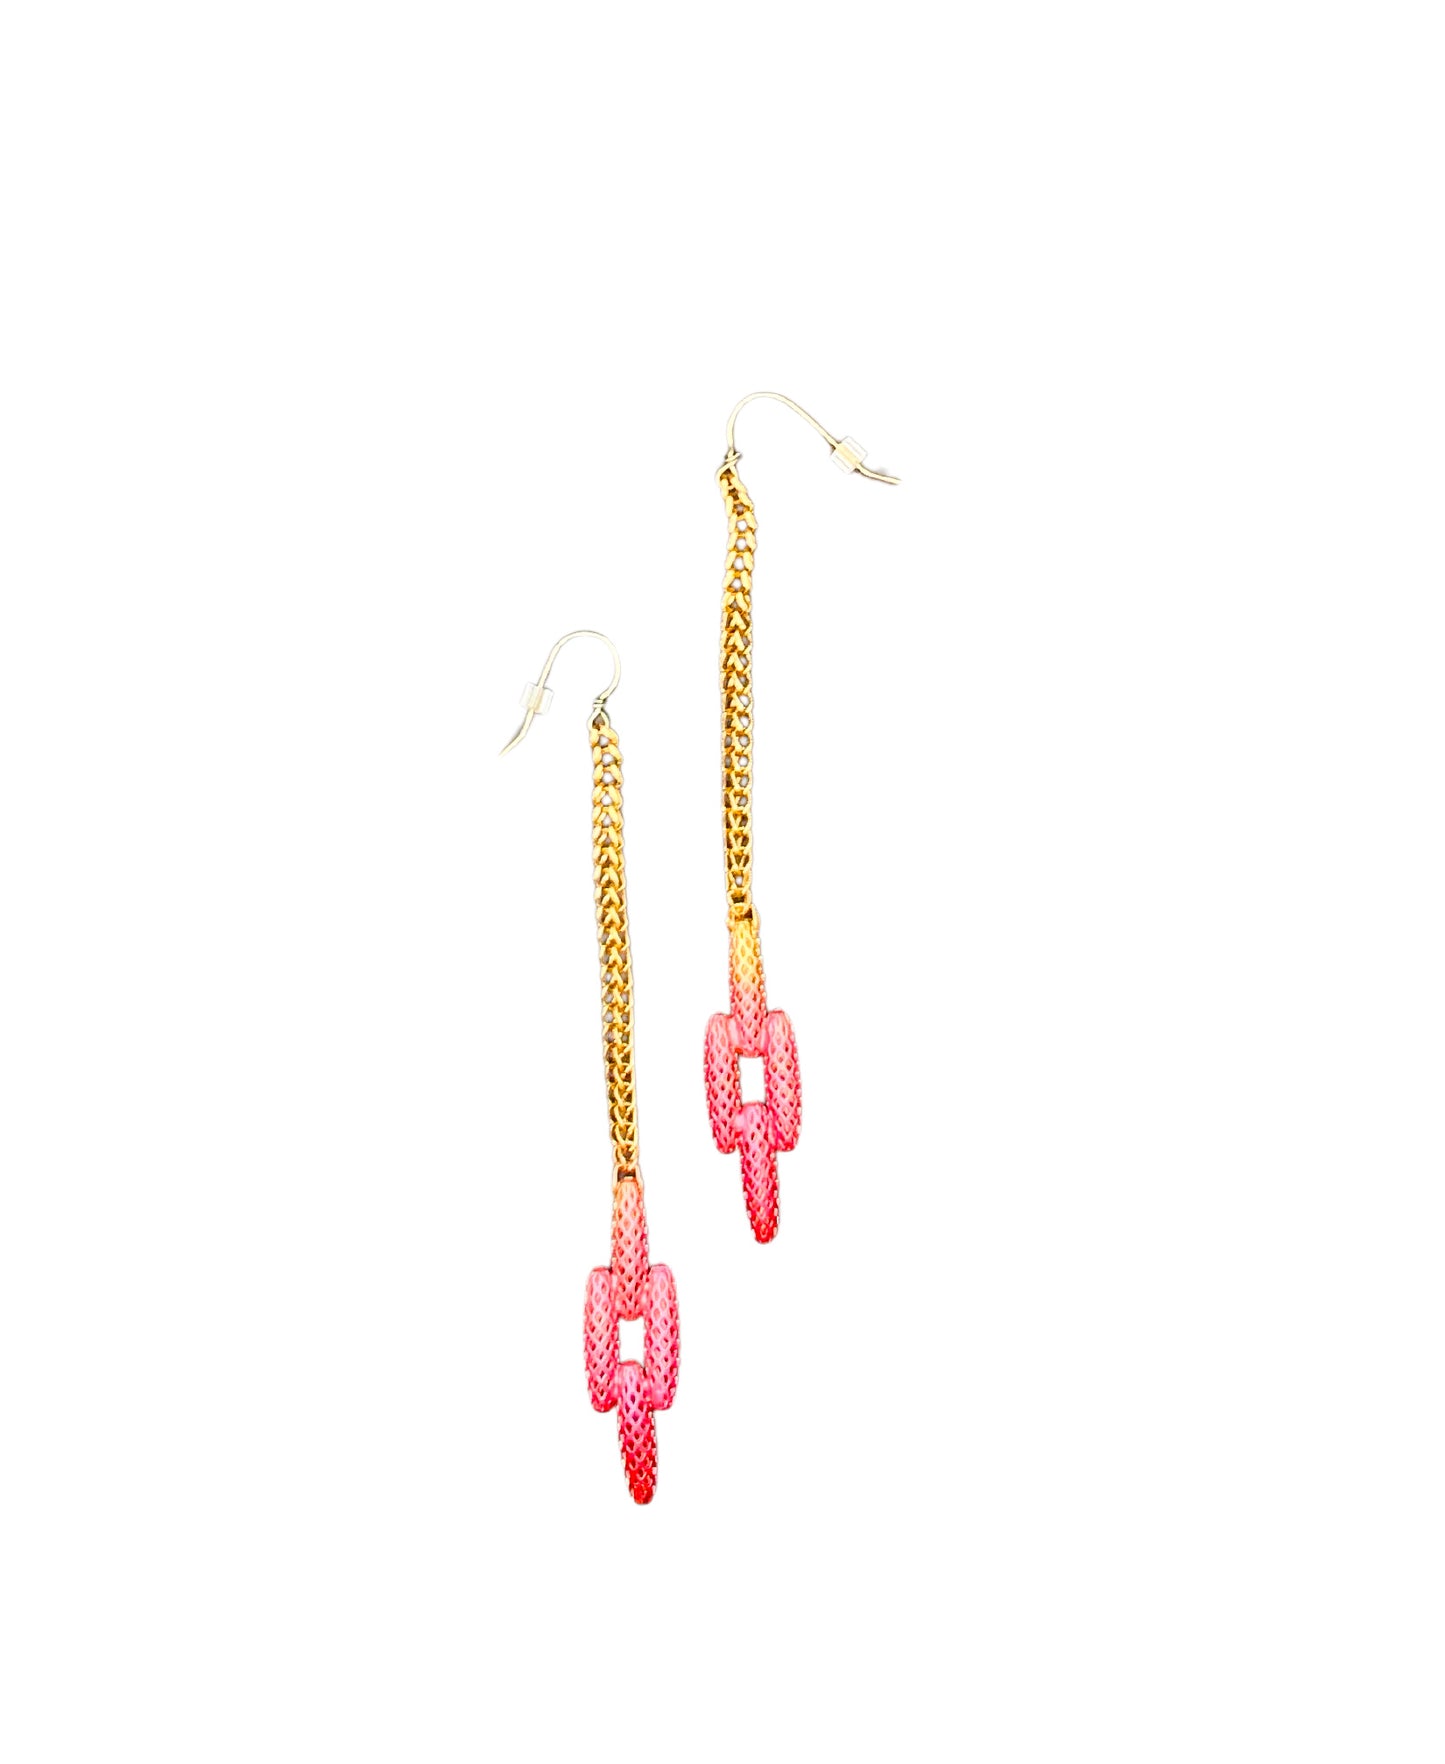 Roman Chain Long Earrings Hot Pink, Red and Gold